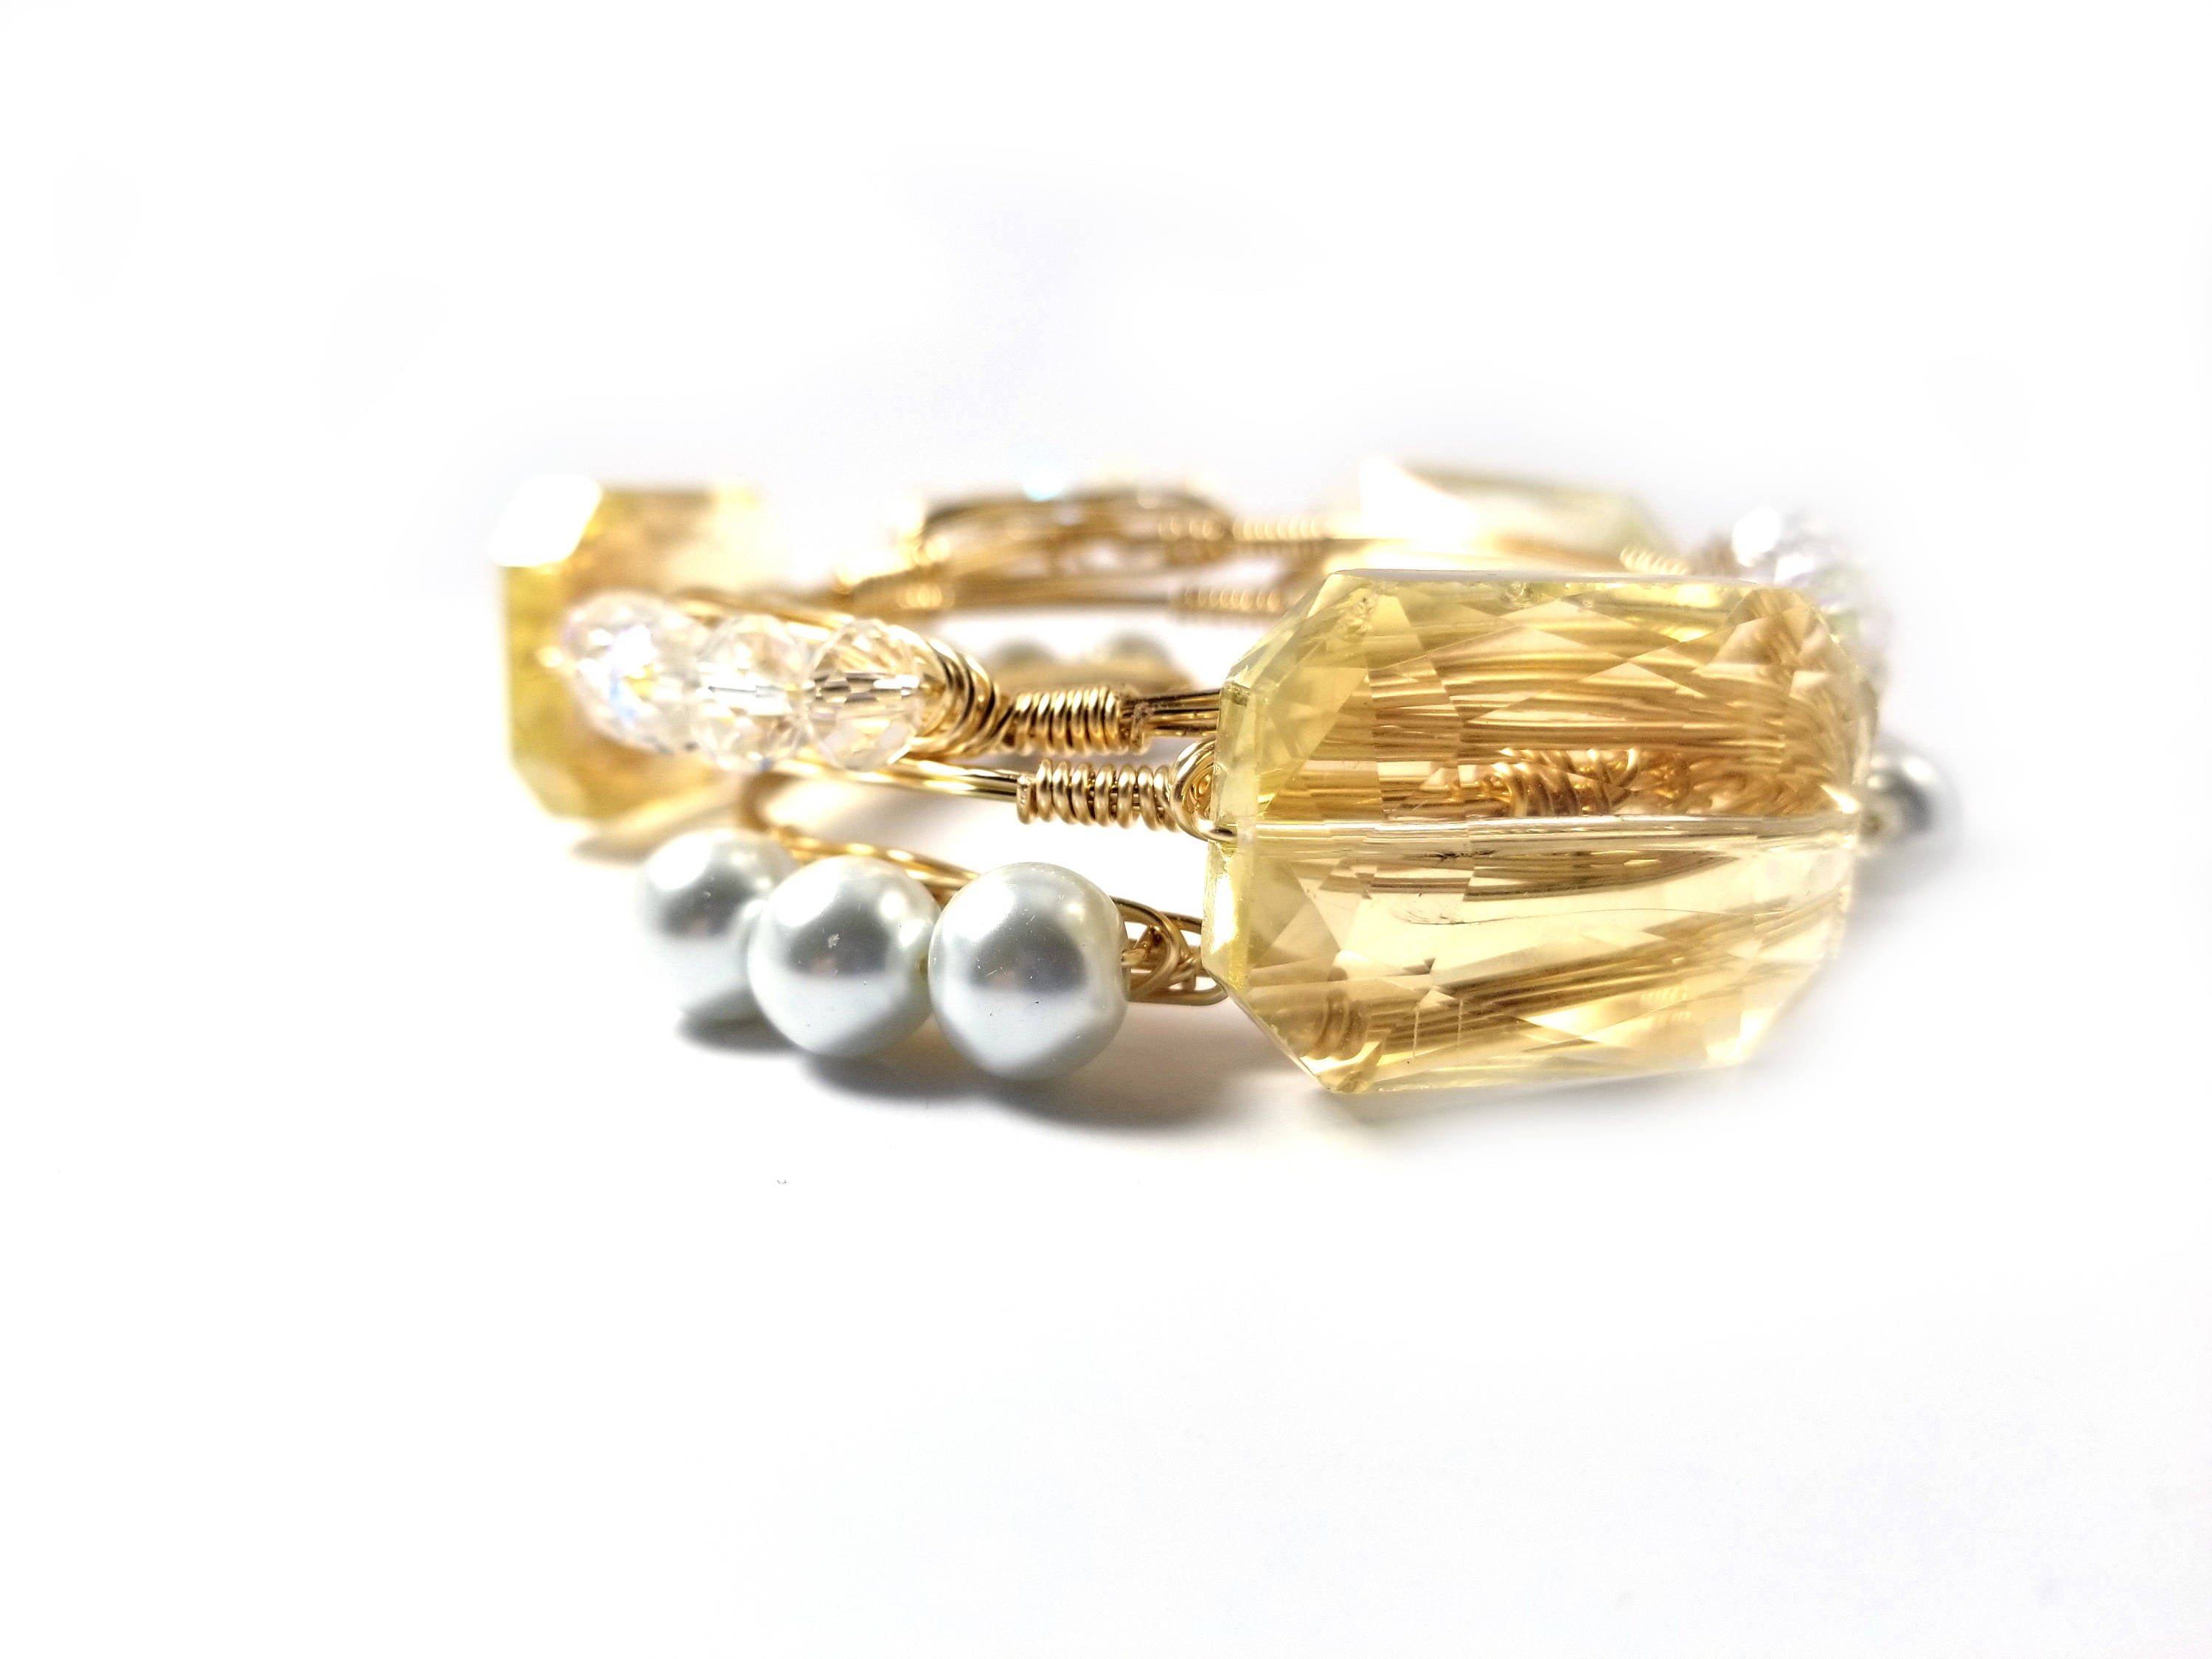 Amber crystal, pearls, and clear crystal set of 3 wire wrapped bangle bracelets